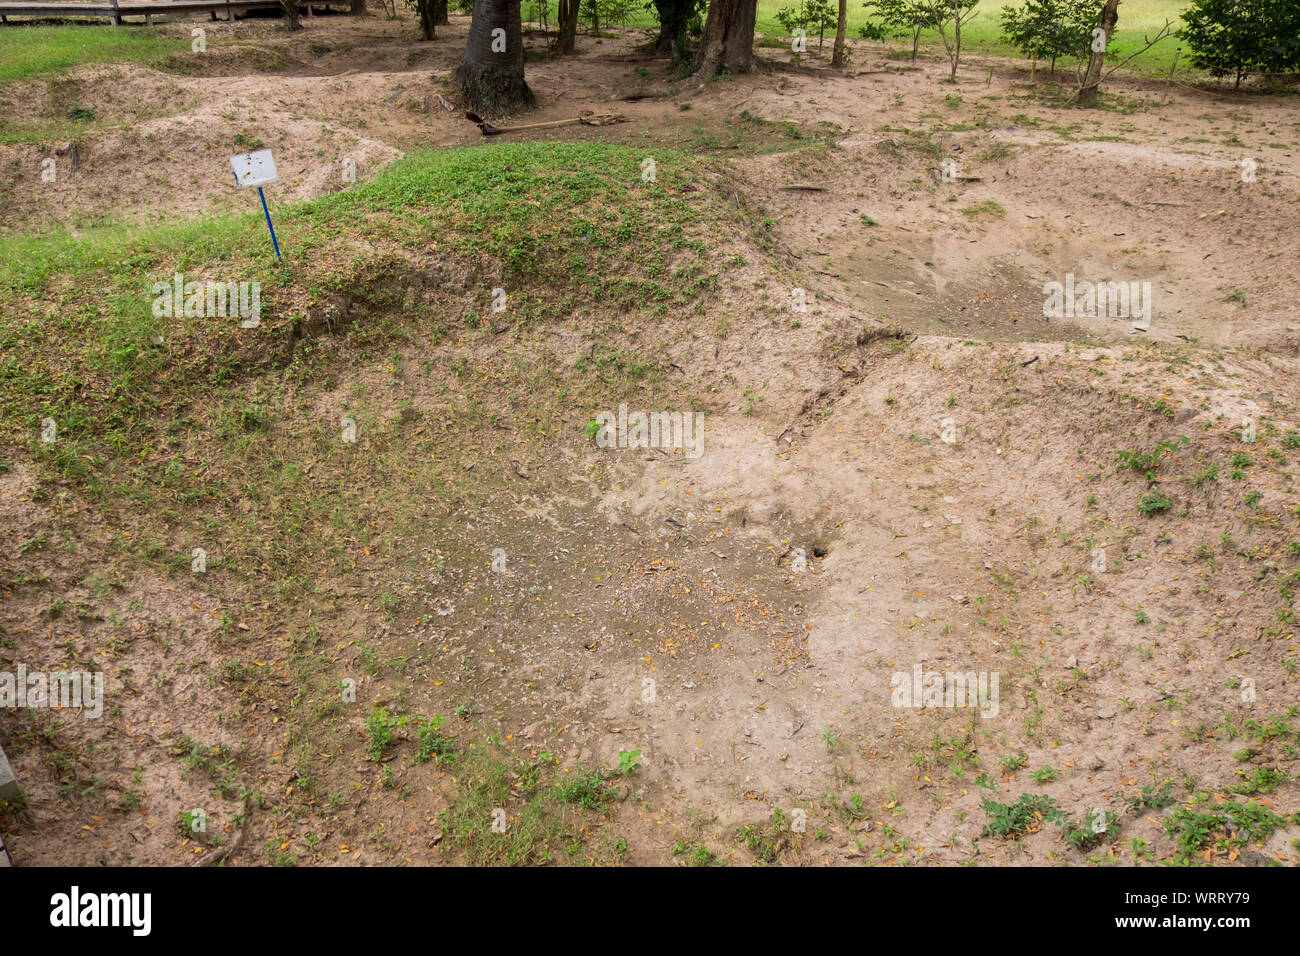 The location of one of the many killing fields mass grave pits at the Choeung Ek Genocidal Center, outiside Phnom Penh, Cambodia. Stock Photo